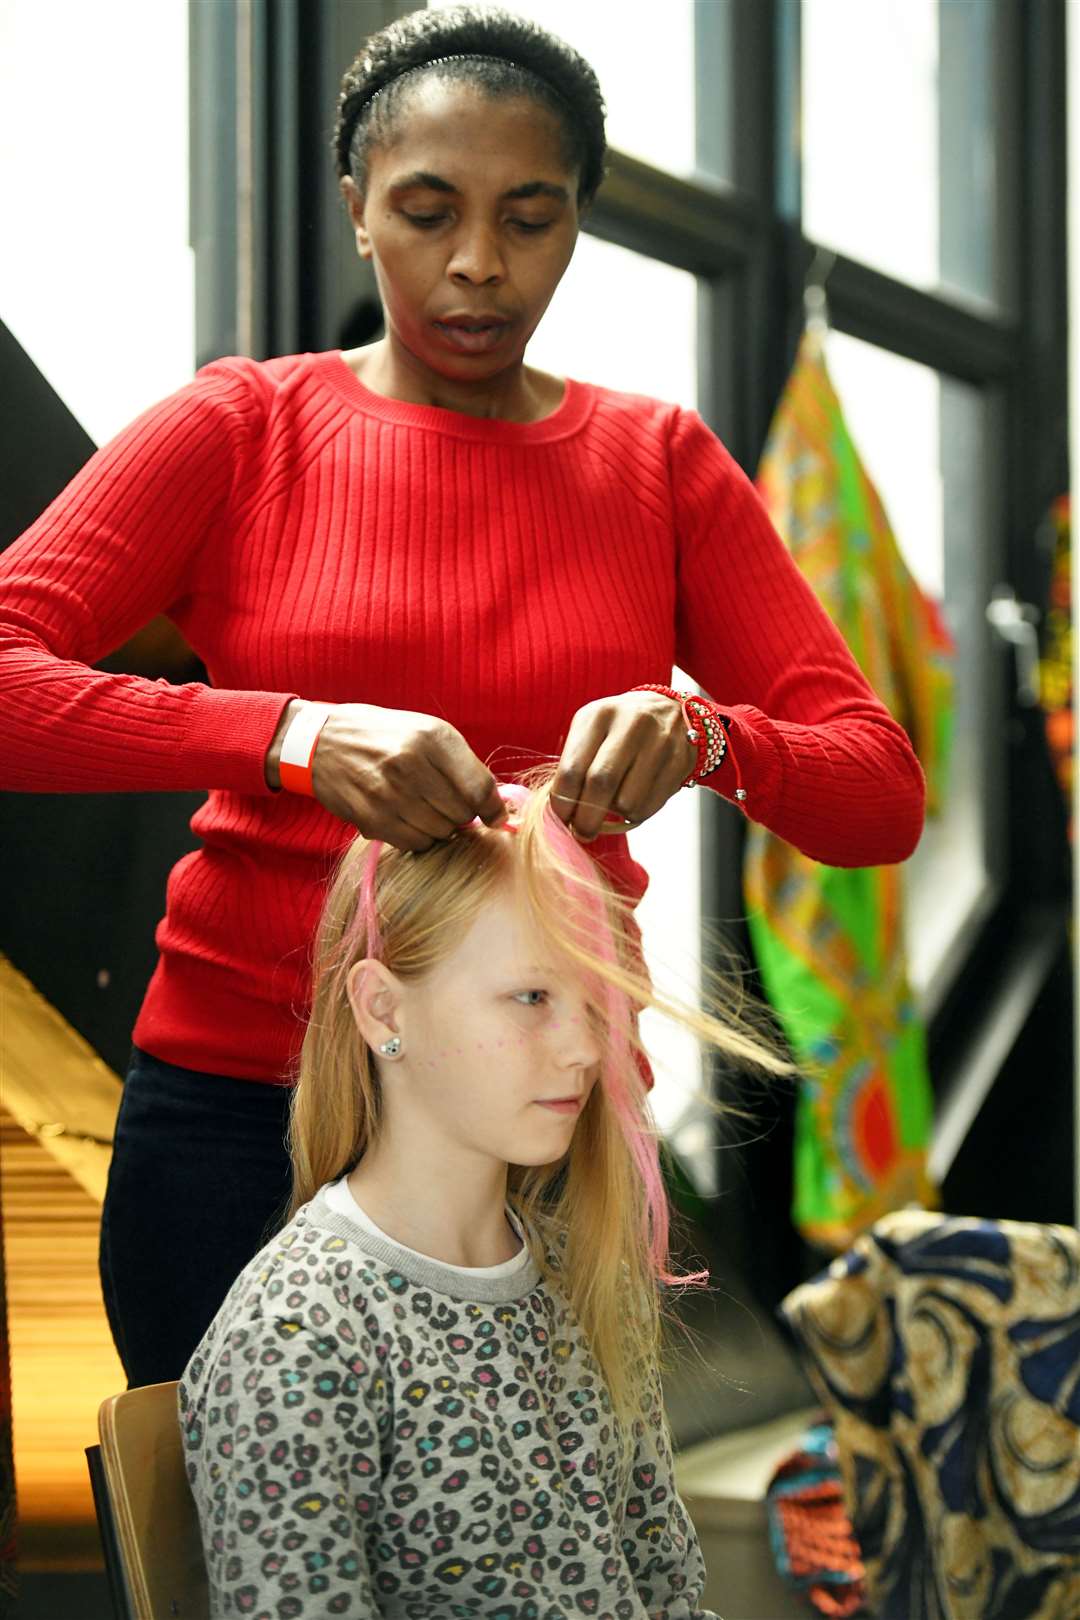 Esther Ruchaghi adding colour to Aliesha McGivern's hair. Picture: James Mackenzie.